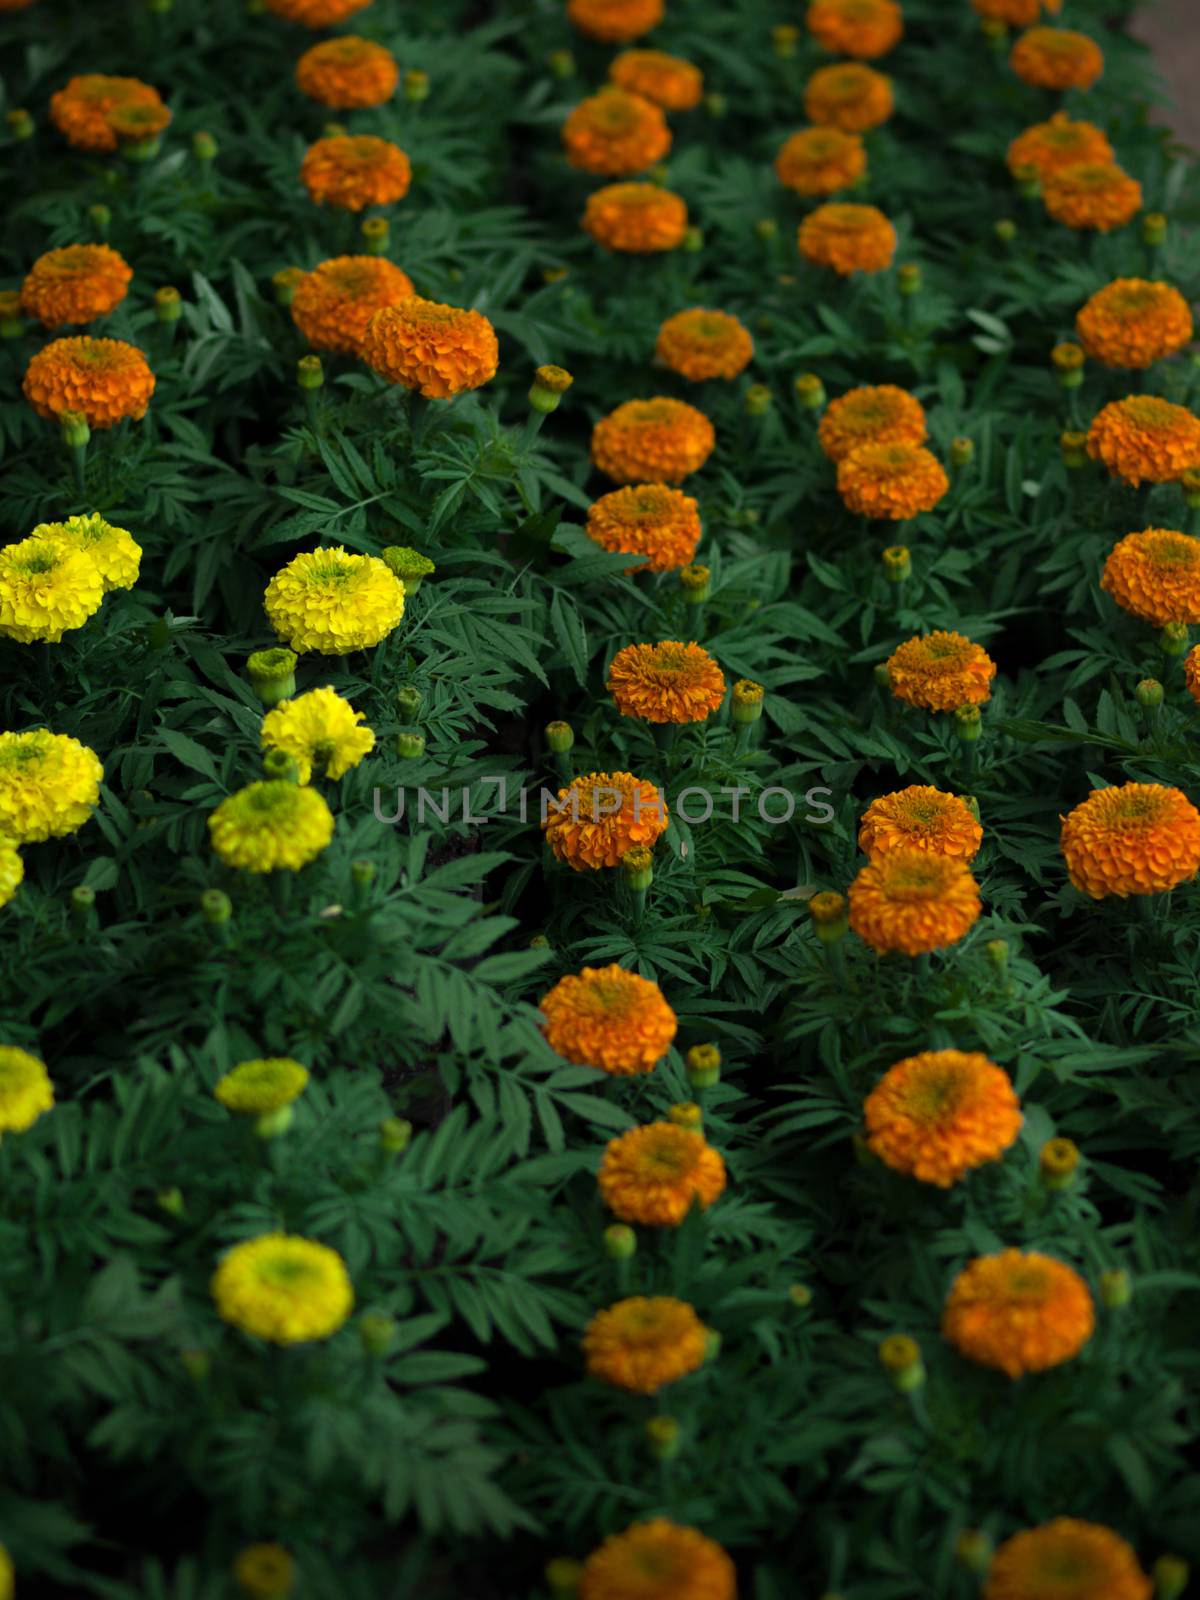 FIELD OF TAGETES, MARIGOLD by PrettyTG